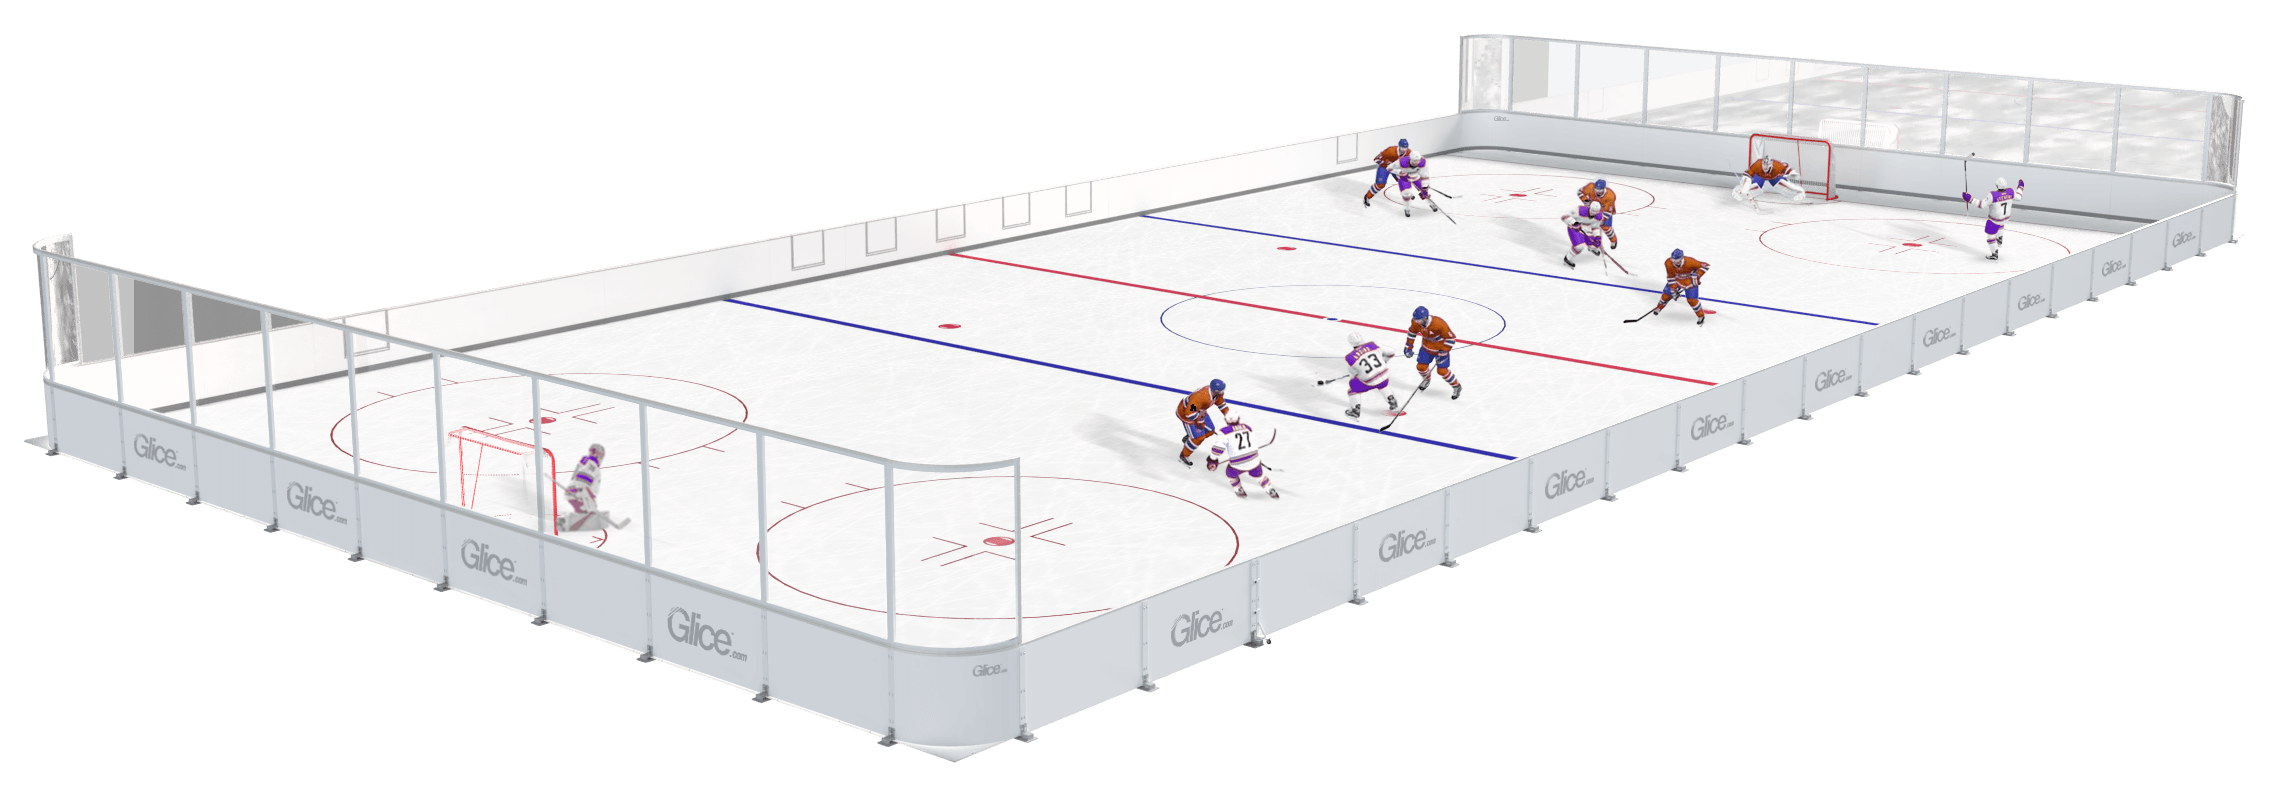 Graphic depiction of Glice synthetic hockey ice rink